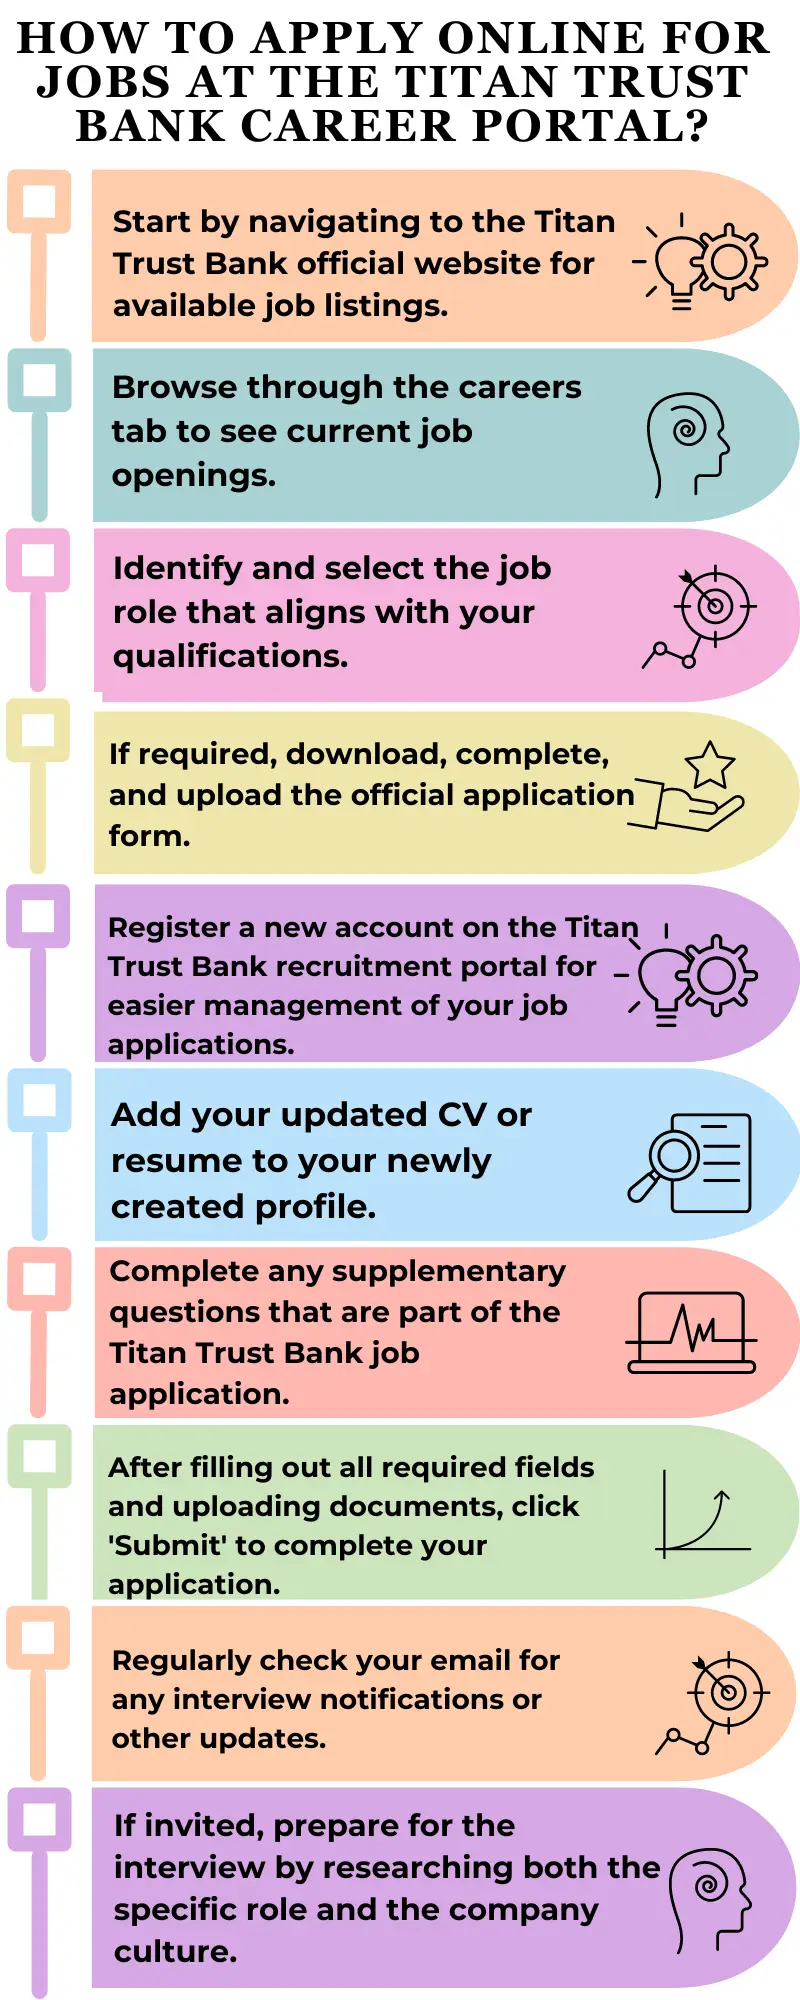 How to Apply Online for Jobs at the Titan Trust Bank Career Portal?